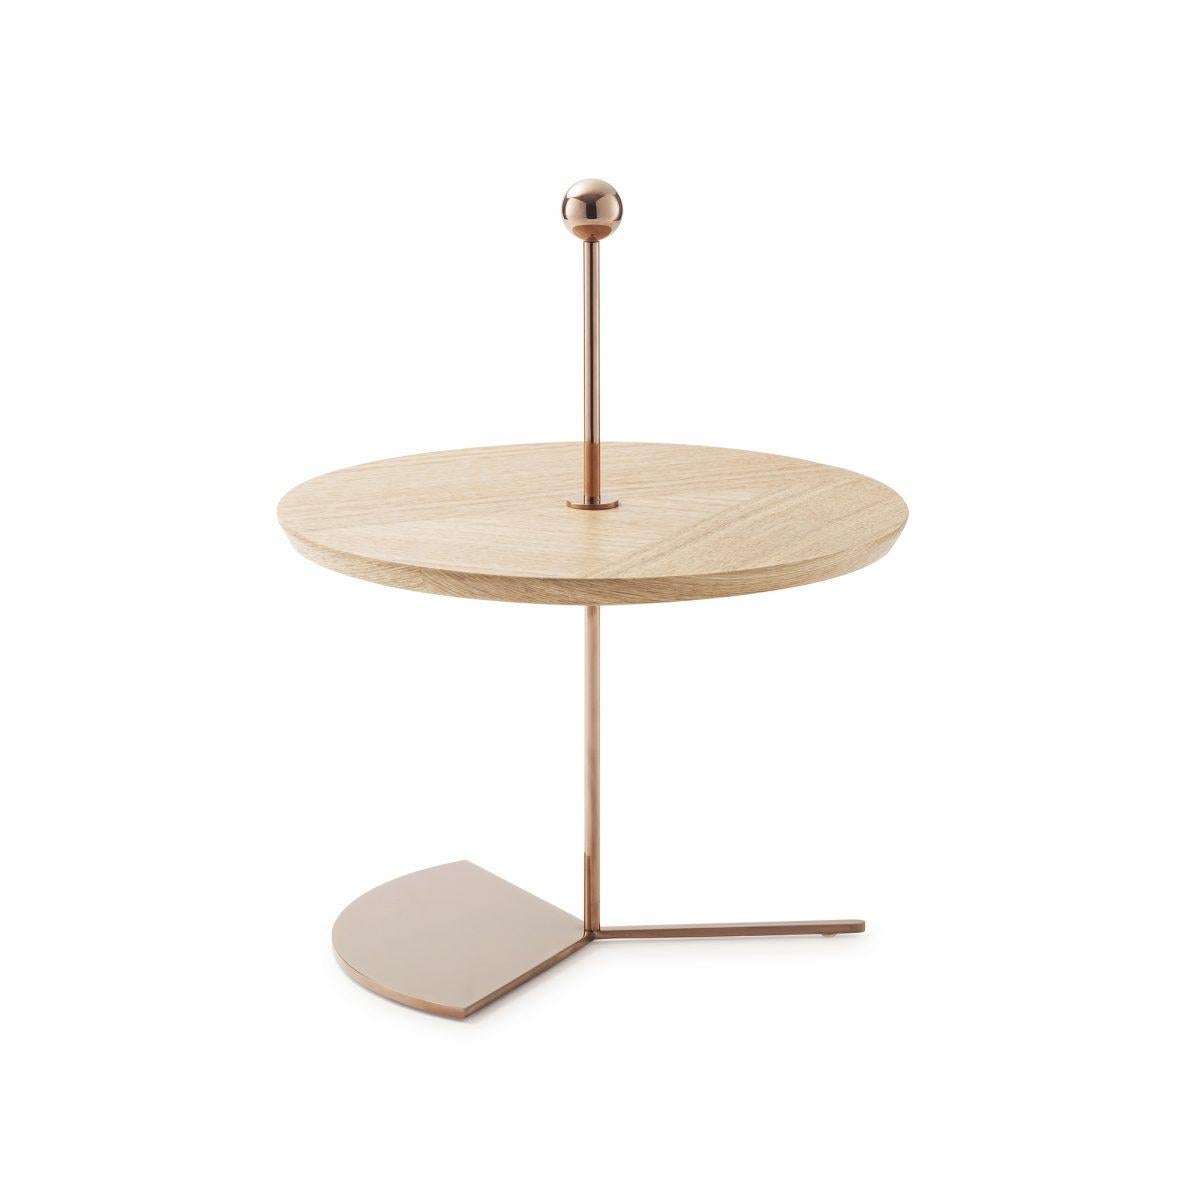 Modern Off The Moon N°2 Cake Stand by Thomas Dariel